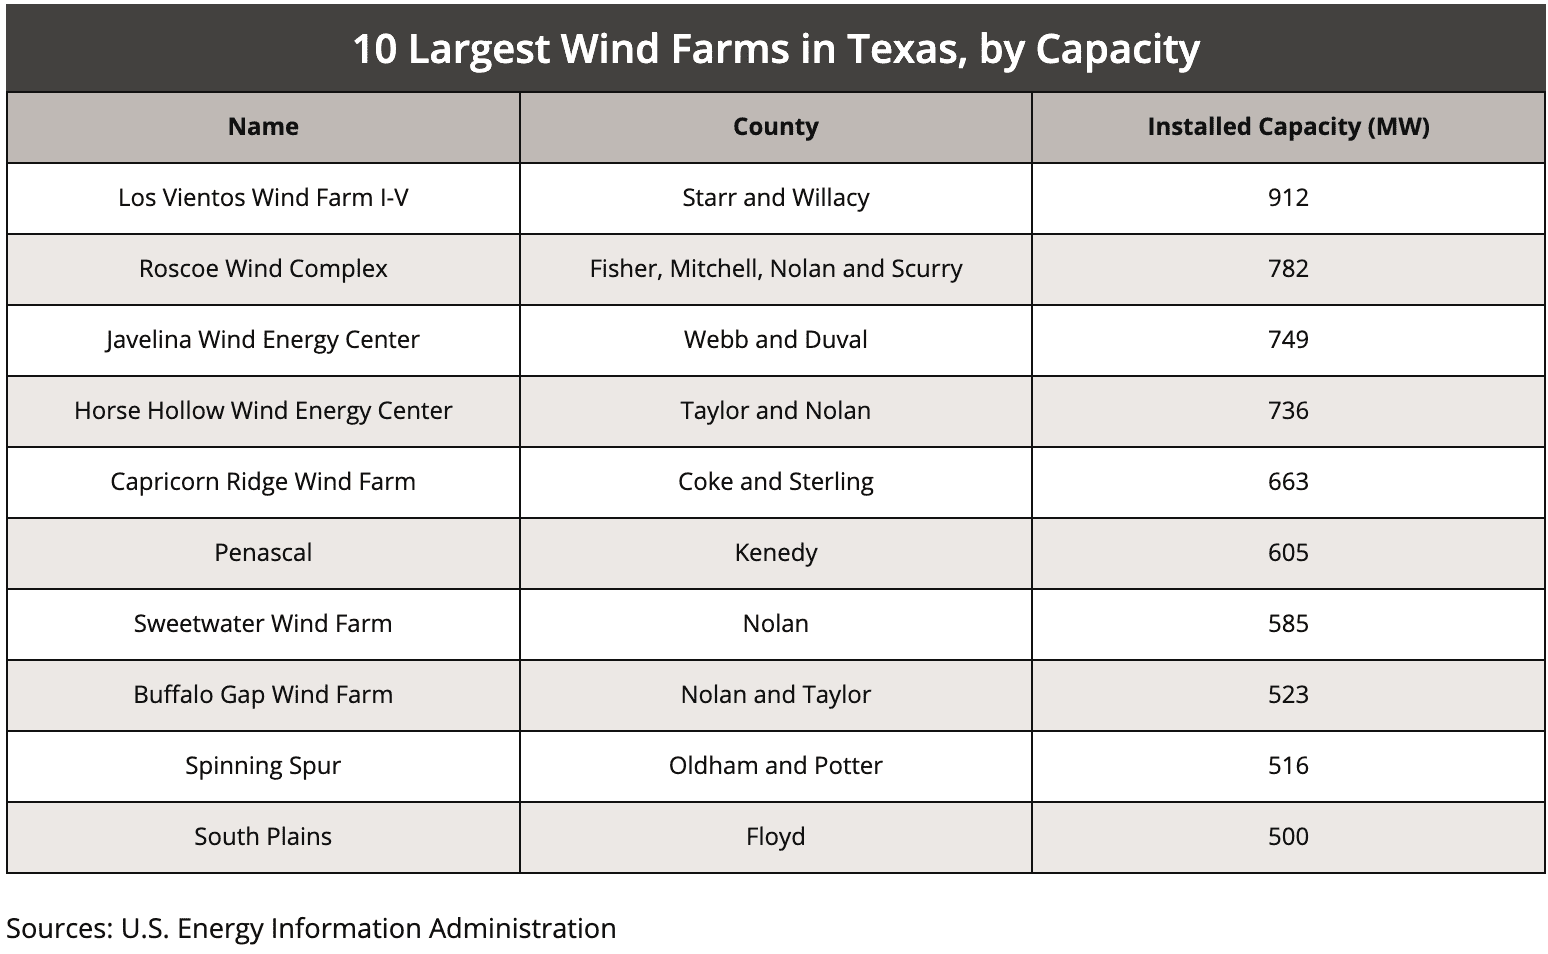 Chart showing the 10 largest wind farms in Texas by installed wind capacity